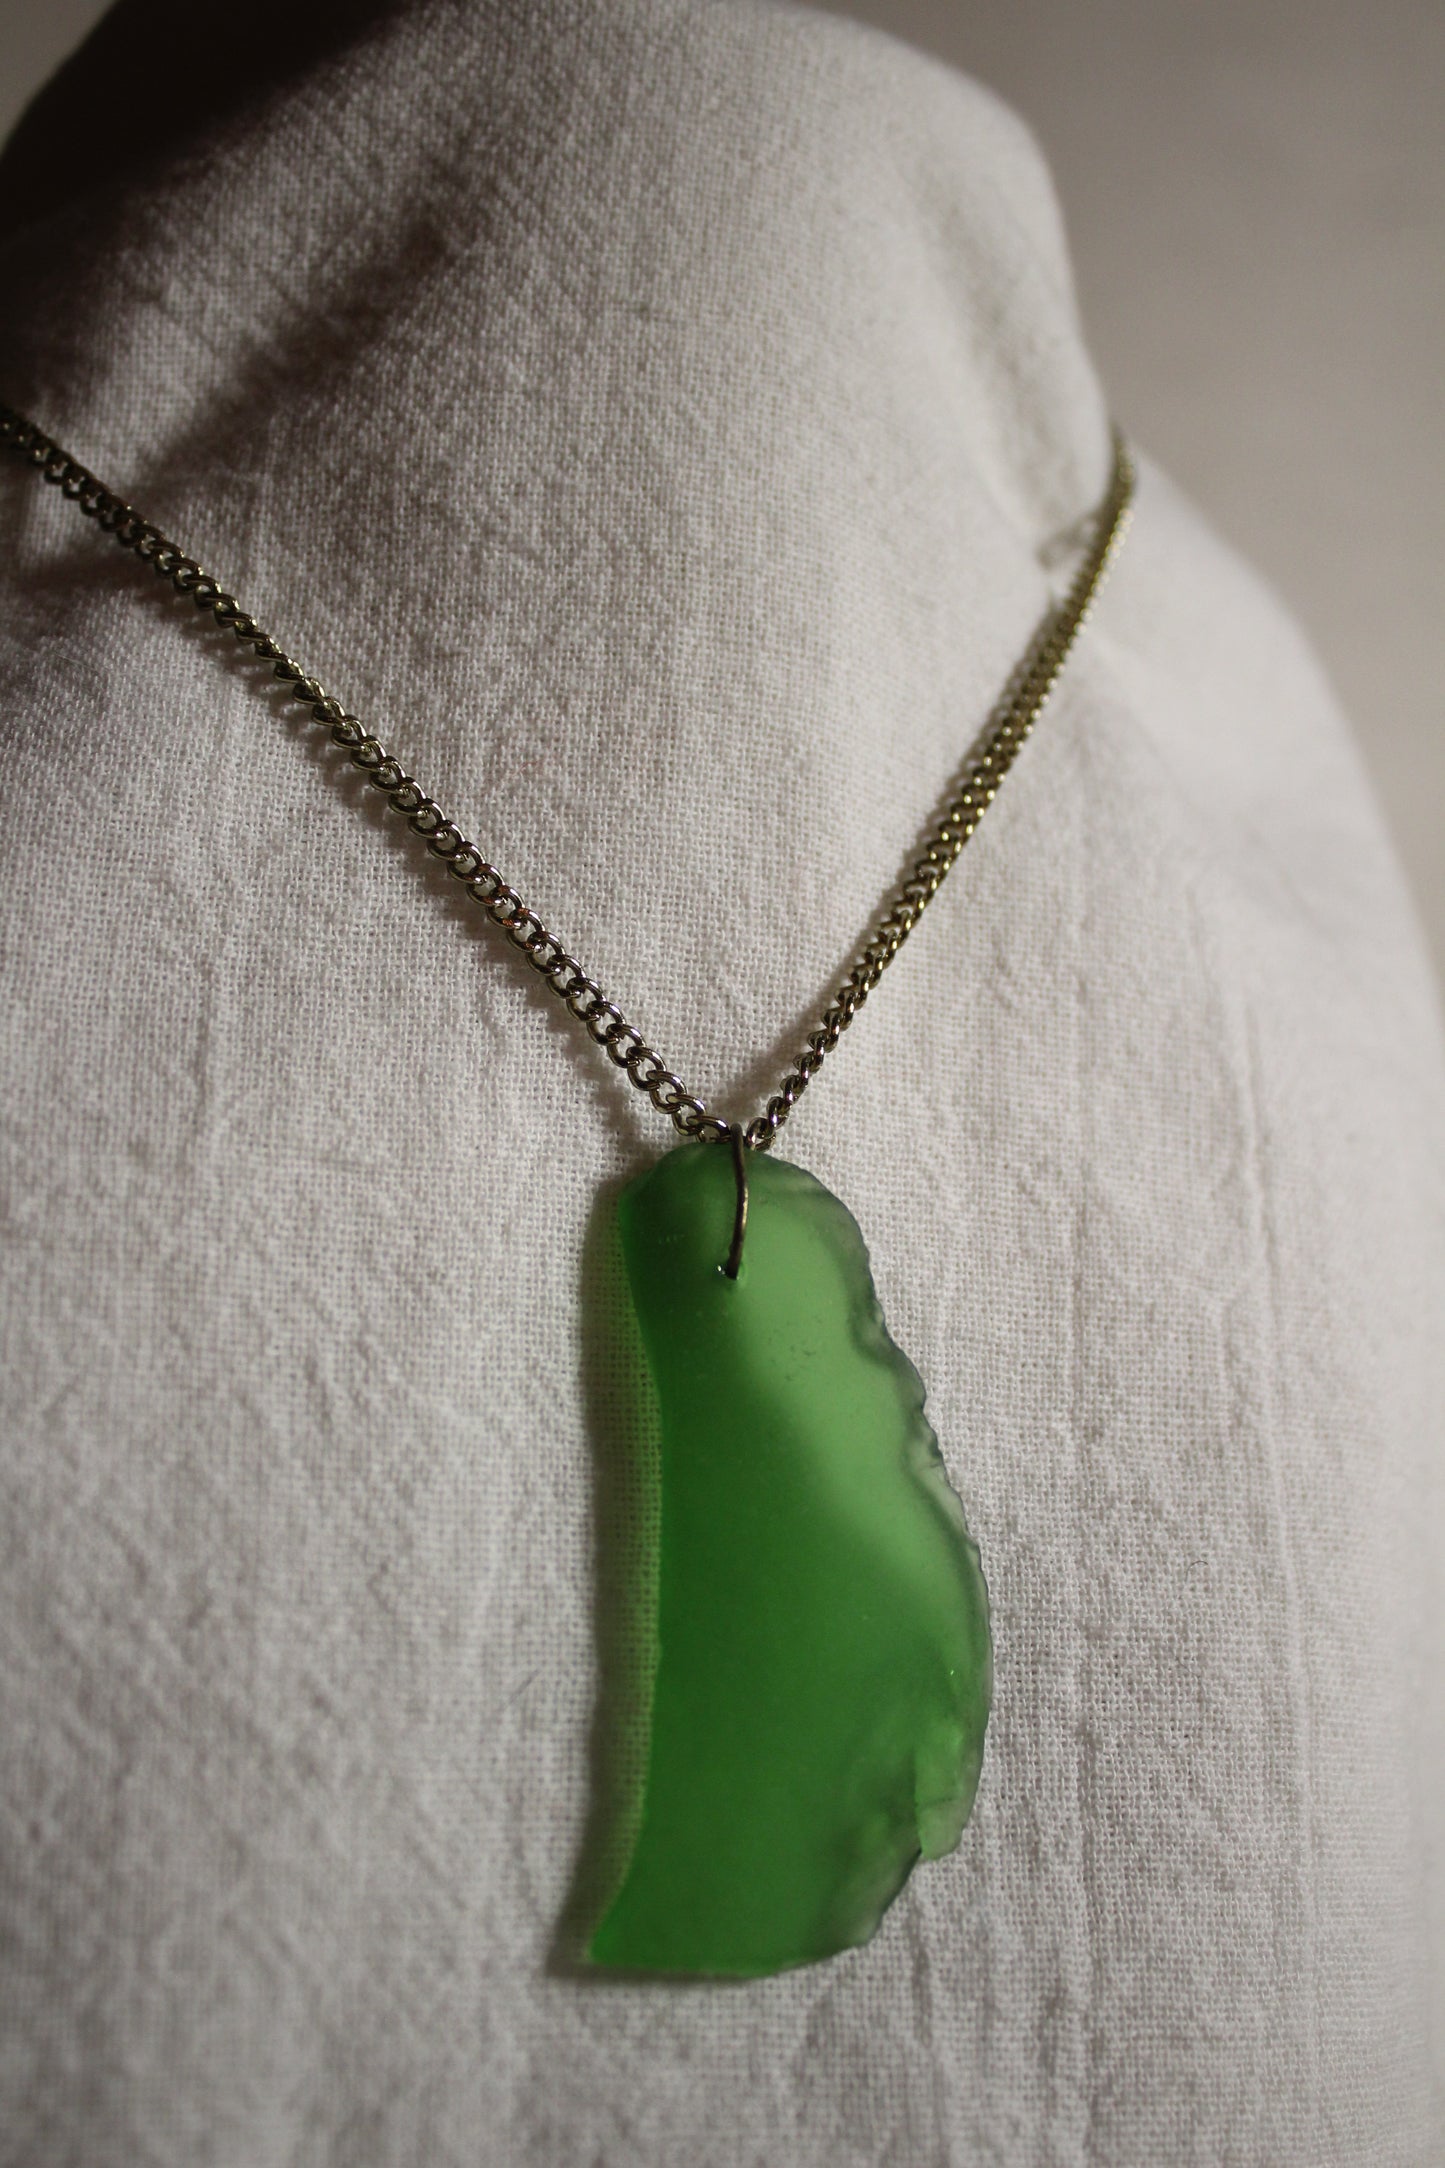 Beach Glass Necklace - Large Green Leaf